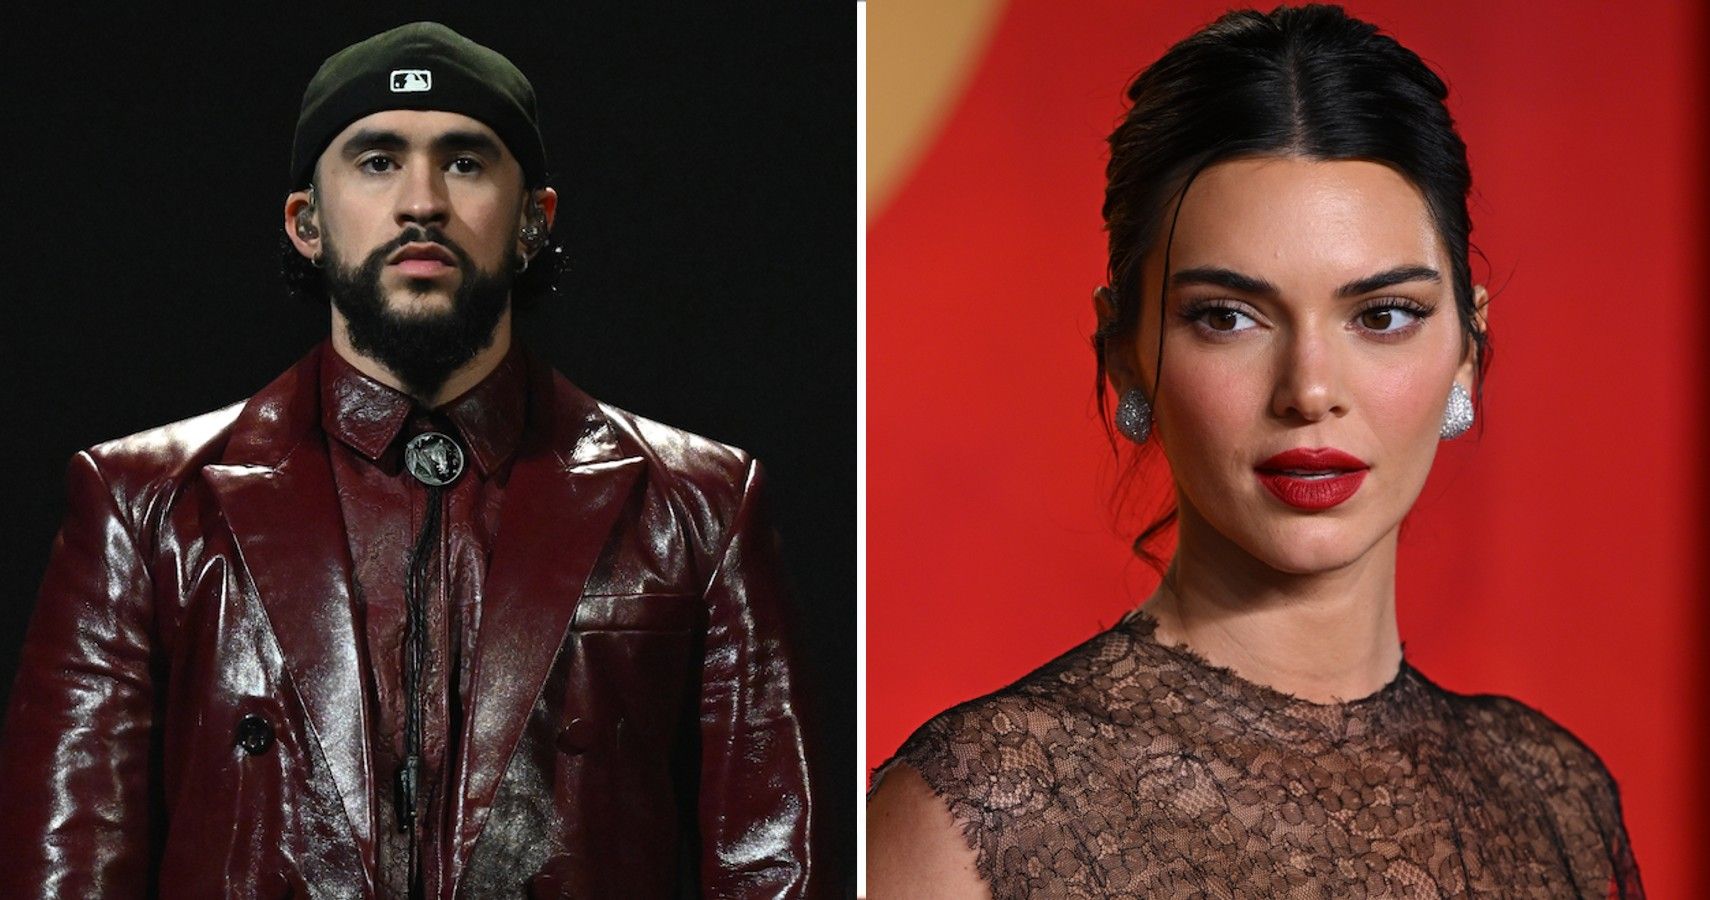 Kendall Jenner And Bad Bunny Tease A Relationship Again 5 Months After ...